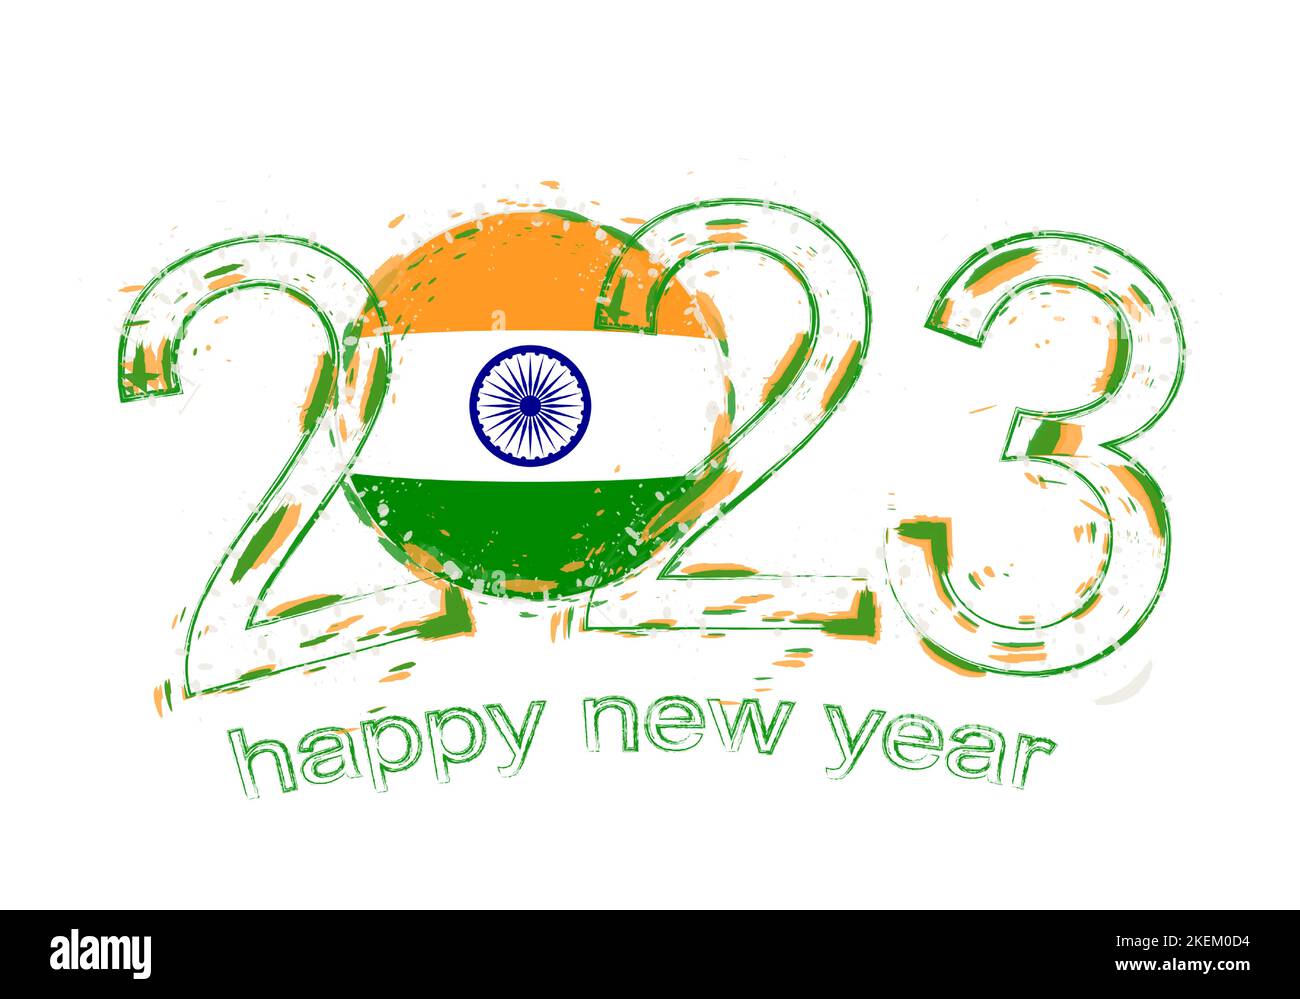 2023 year in grunge style with flag of india holiday grunge vector illustration 2KEM0D4